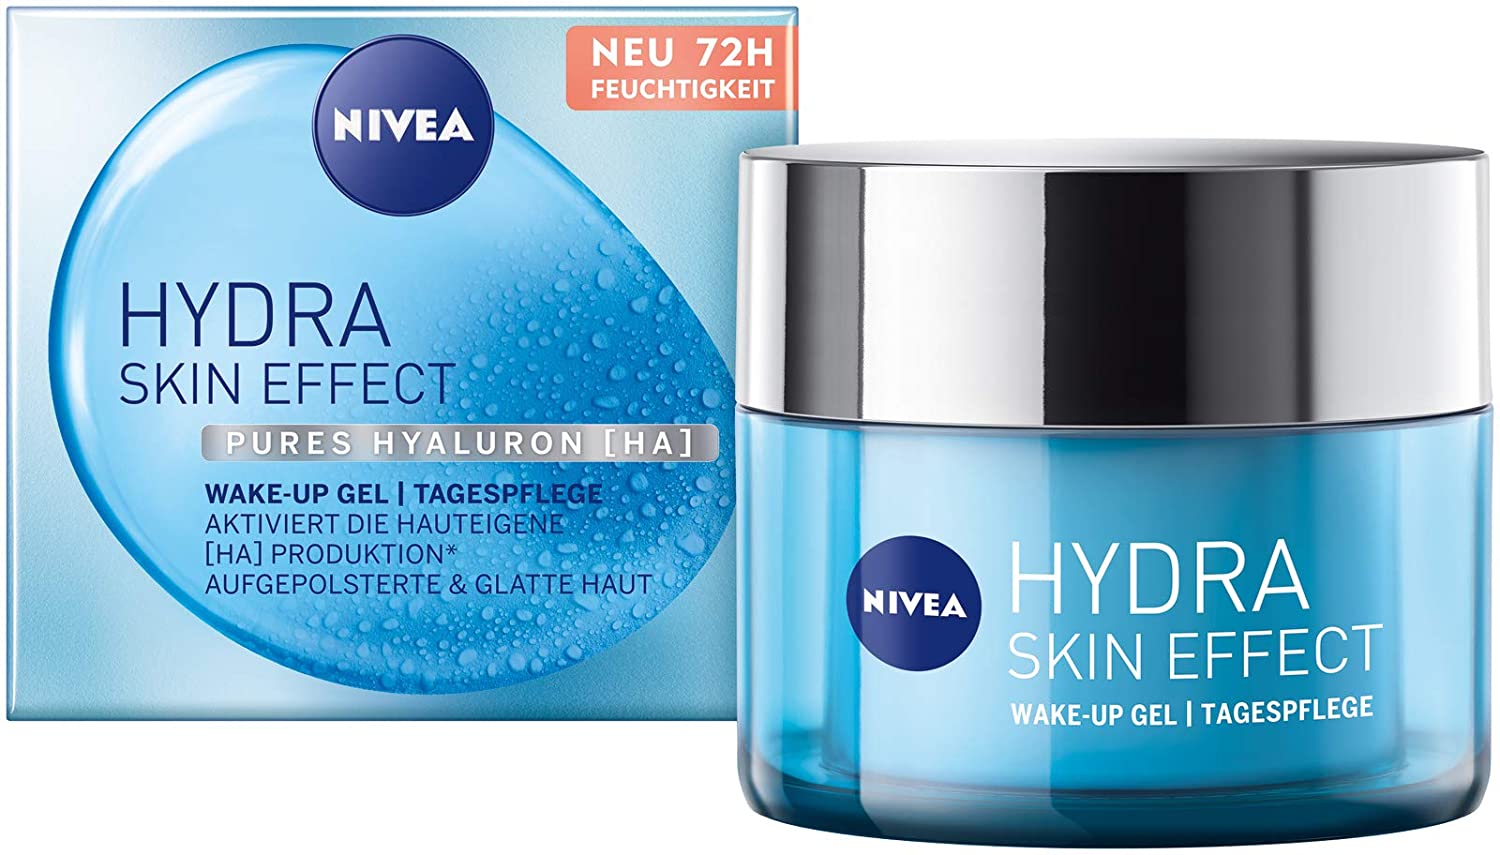 HYDRA SKIN EFFECT moisturizing cream with a gel texture for the day NIVEA Nivea